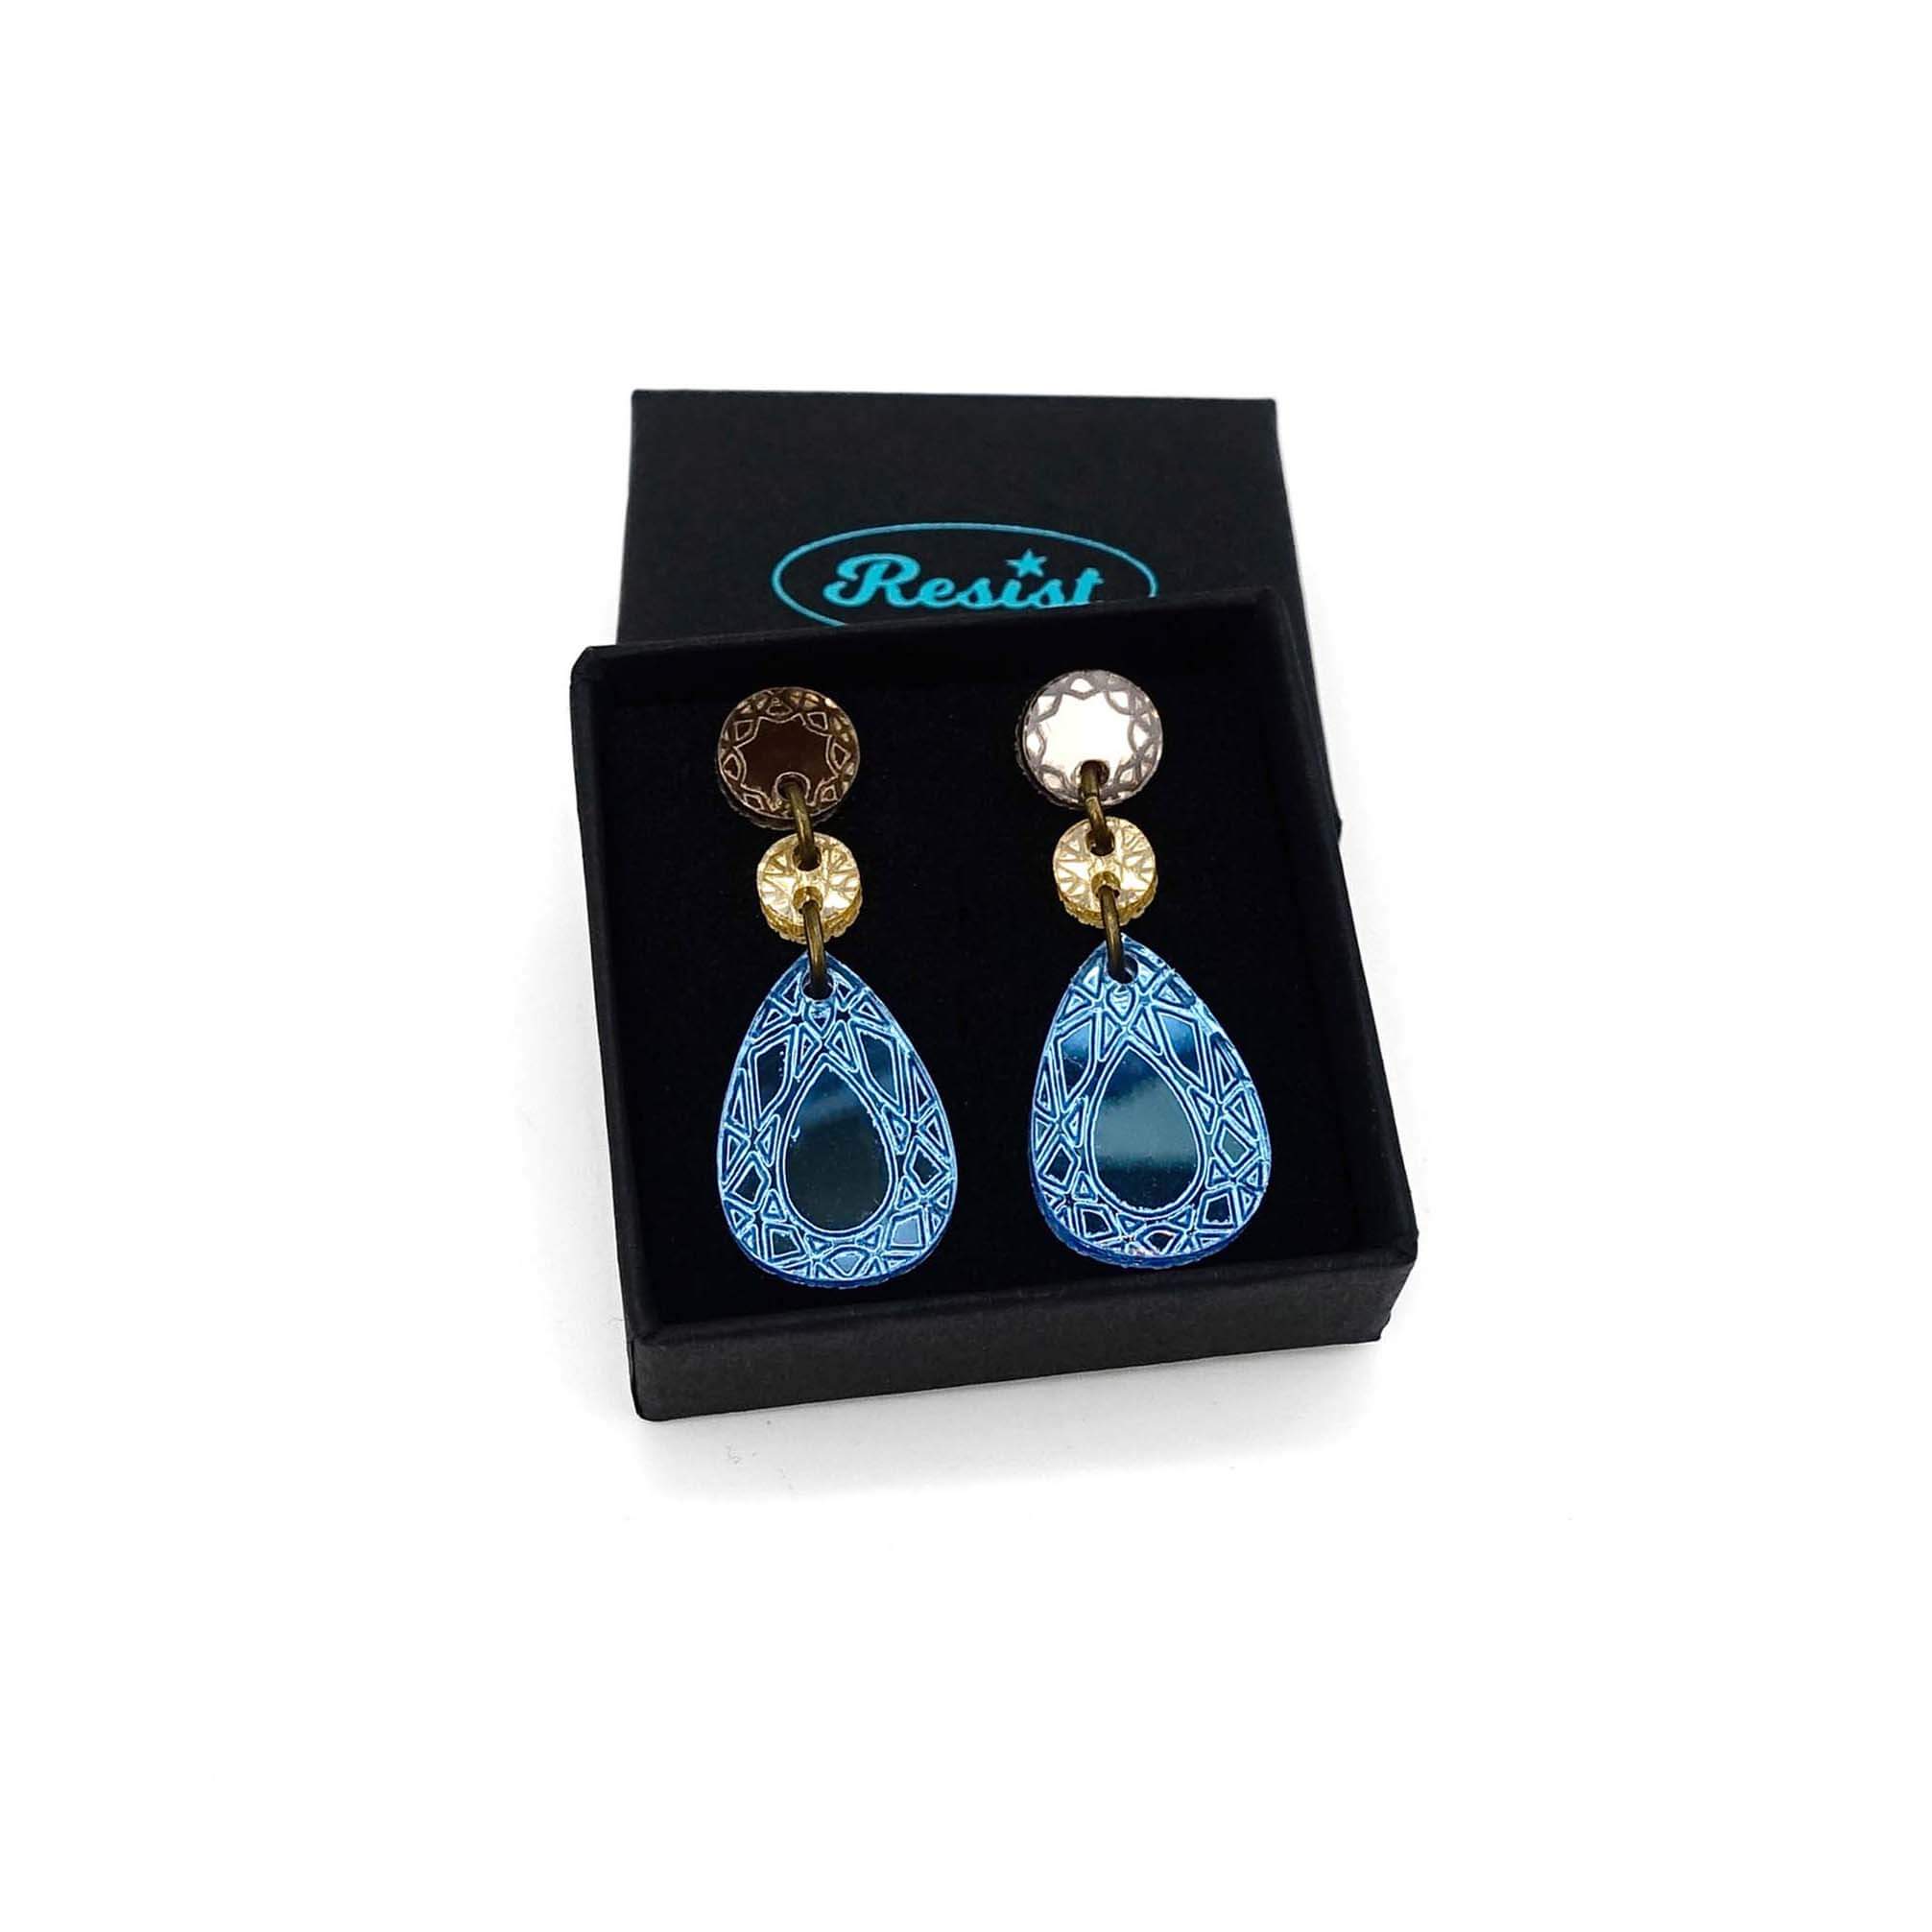 Belle Époque french drop earrings in sky mirror. Shown in a small Wear and Resist gift box.  